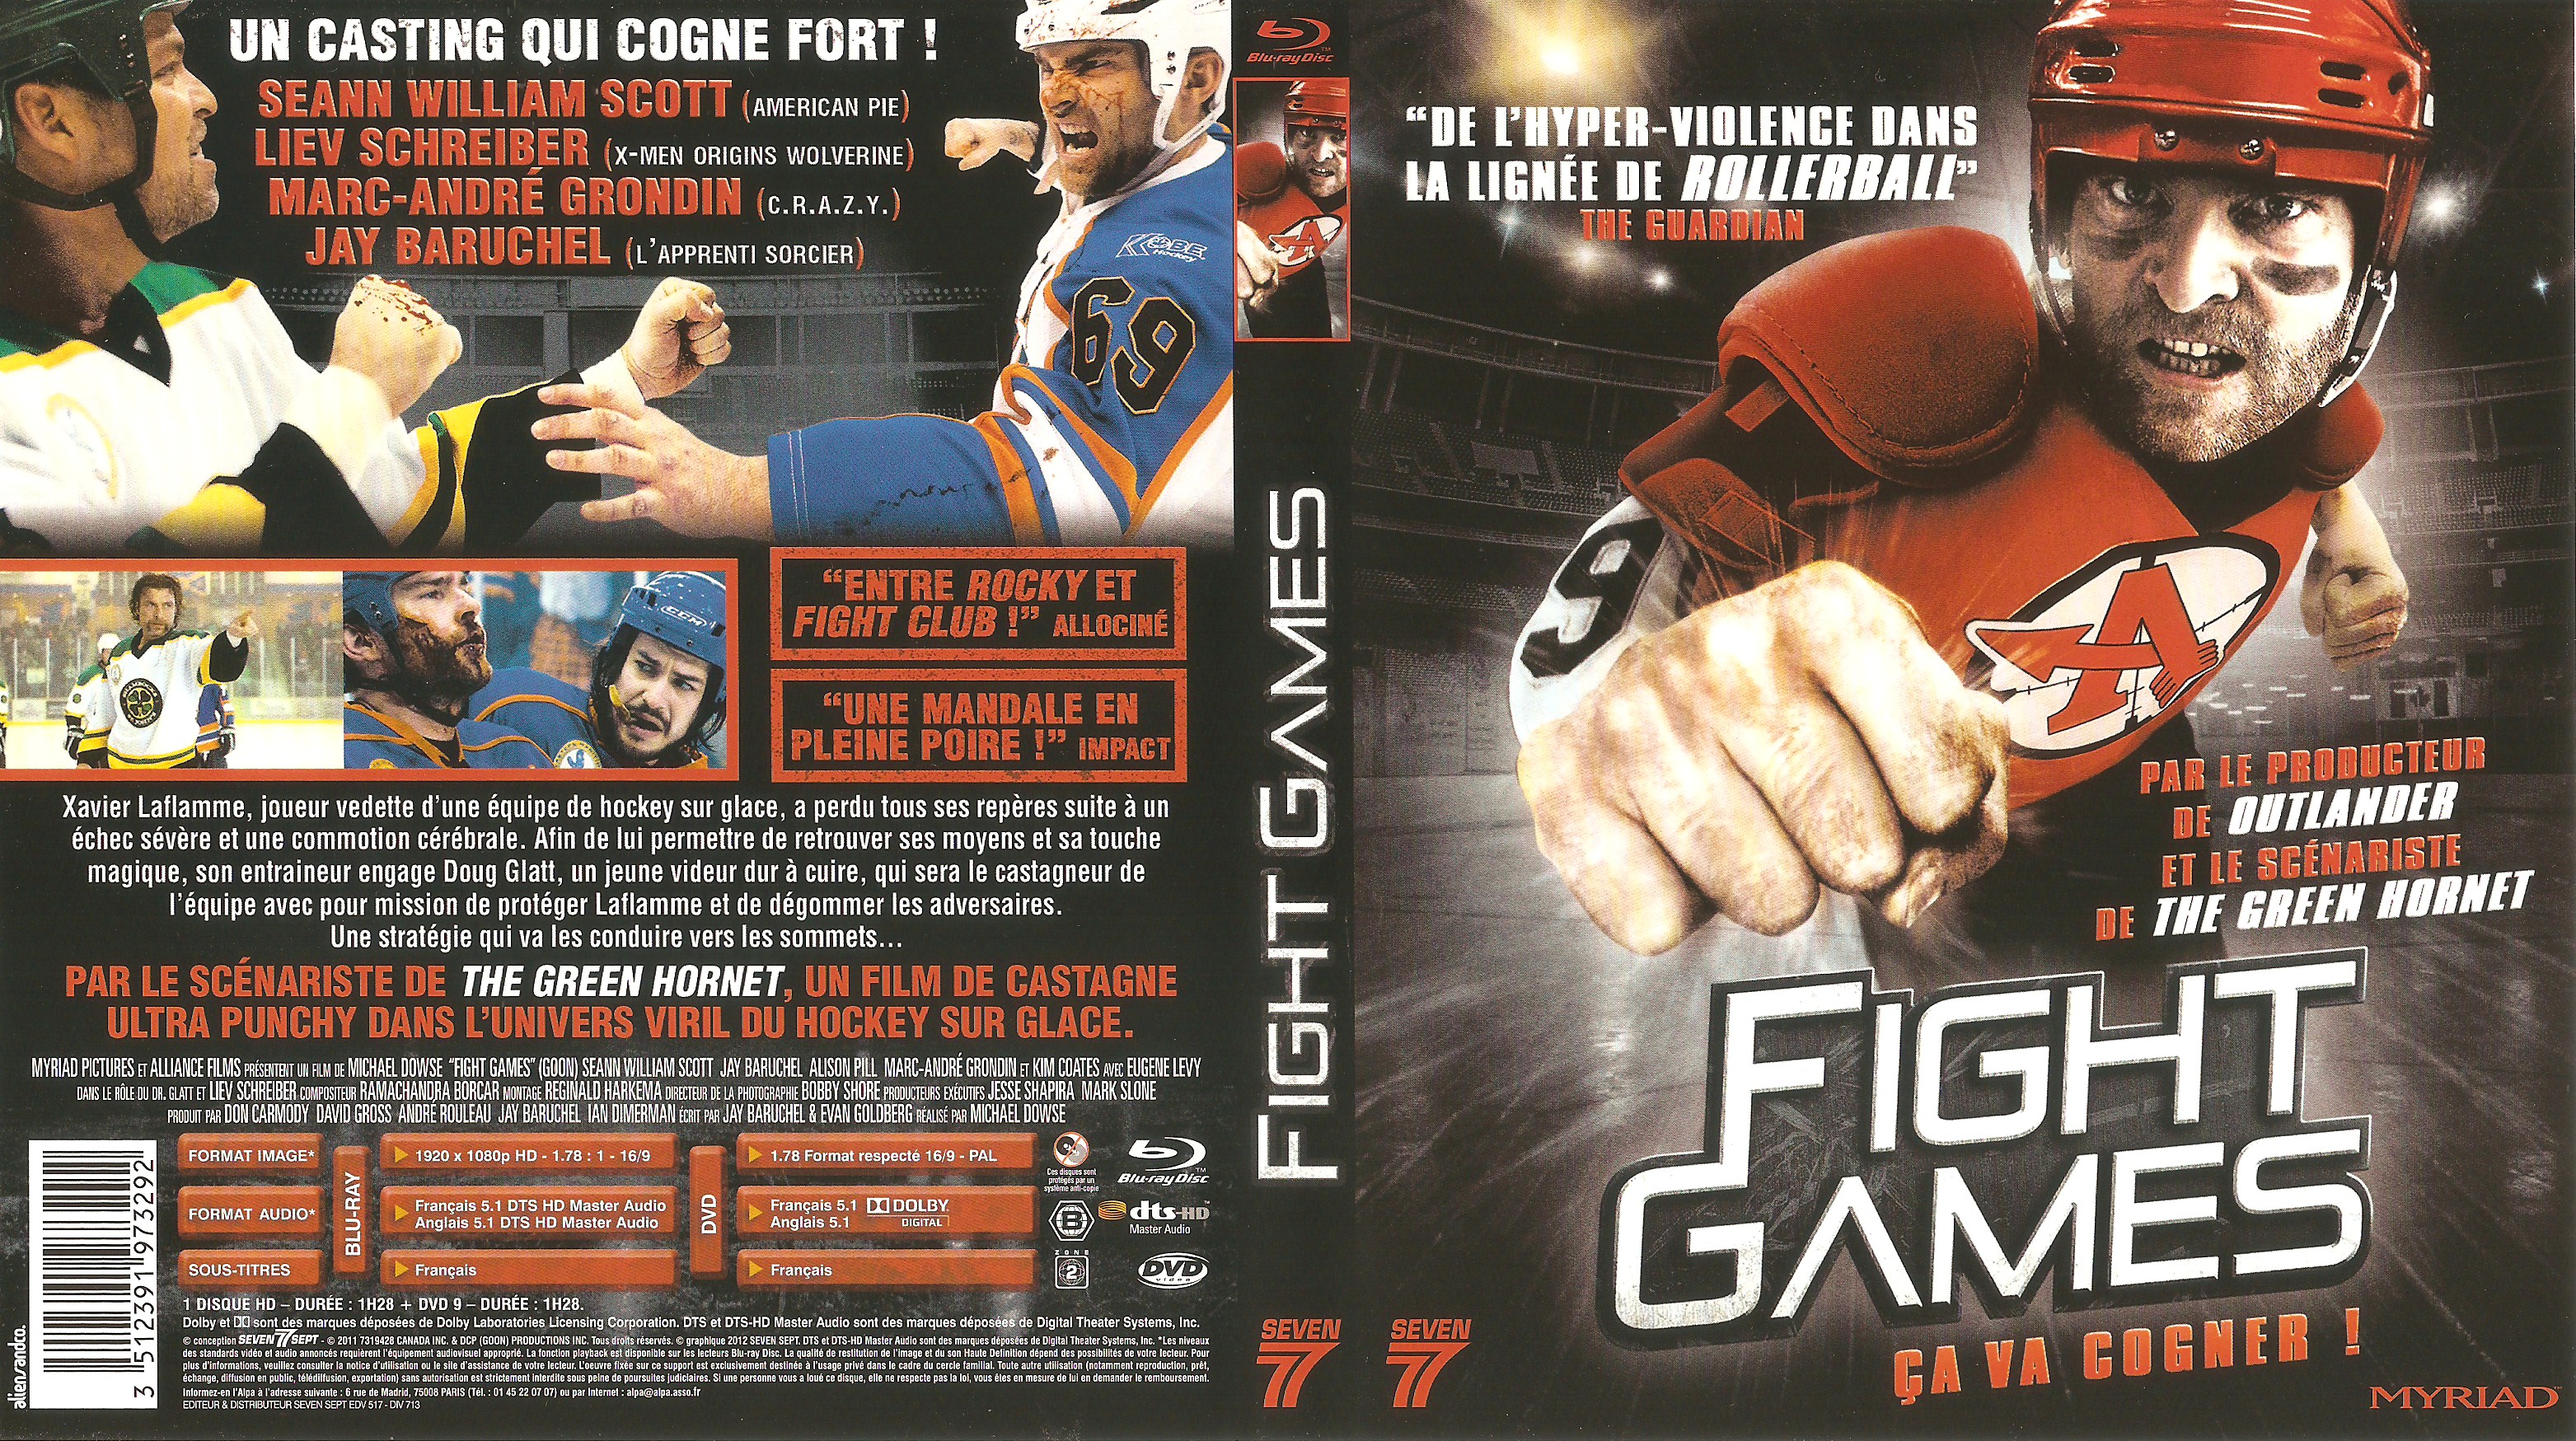 Jaquette DVD Fight Games (BLU-RAY)